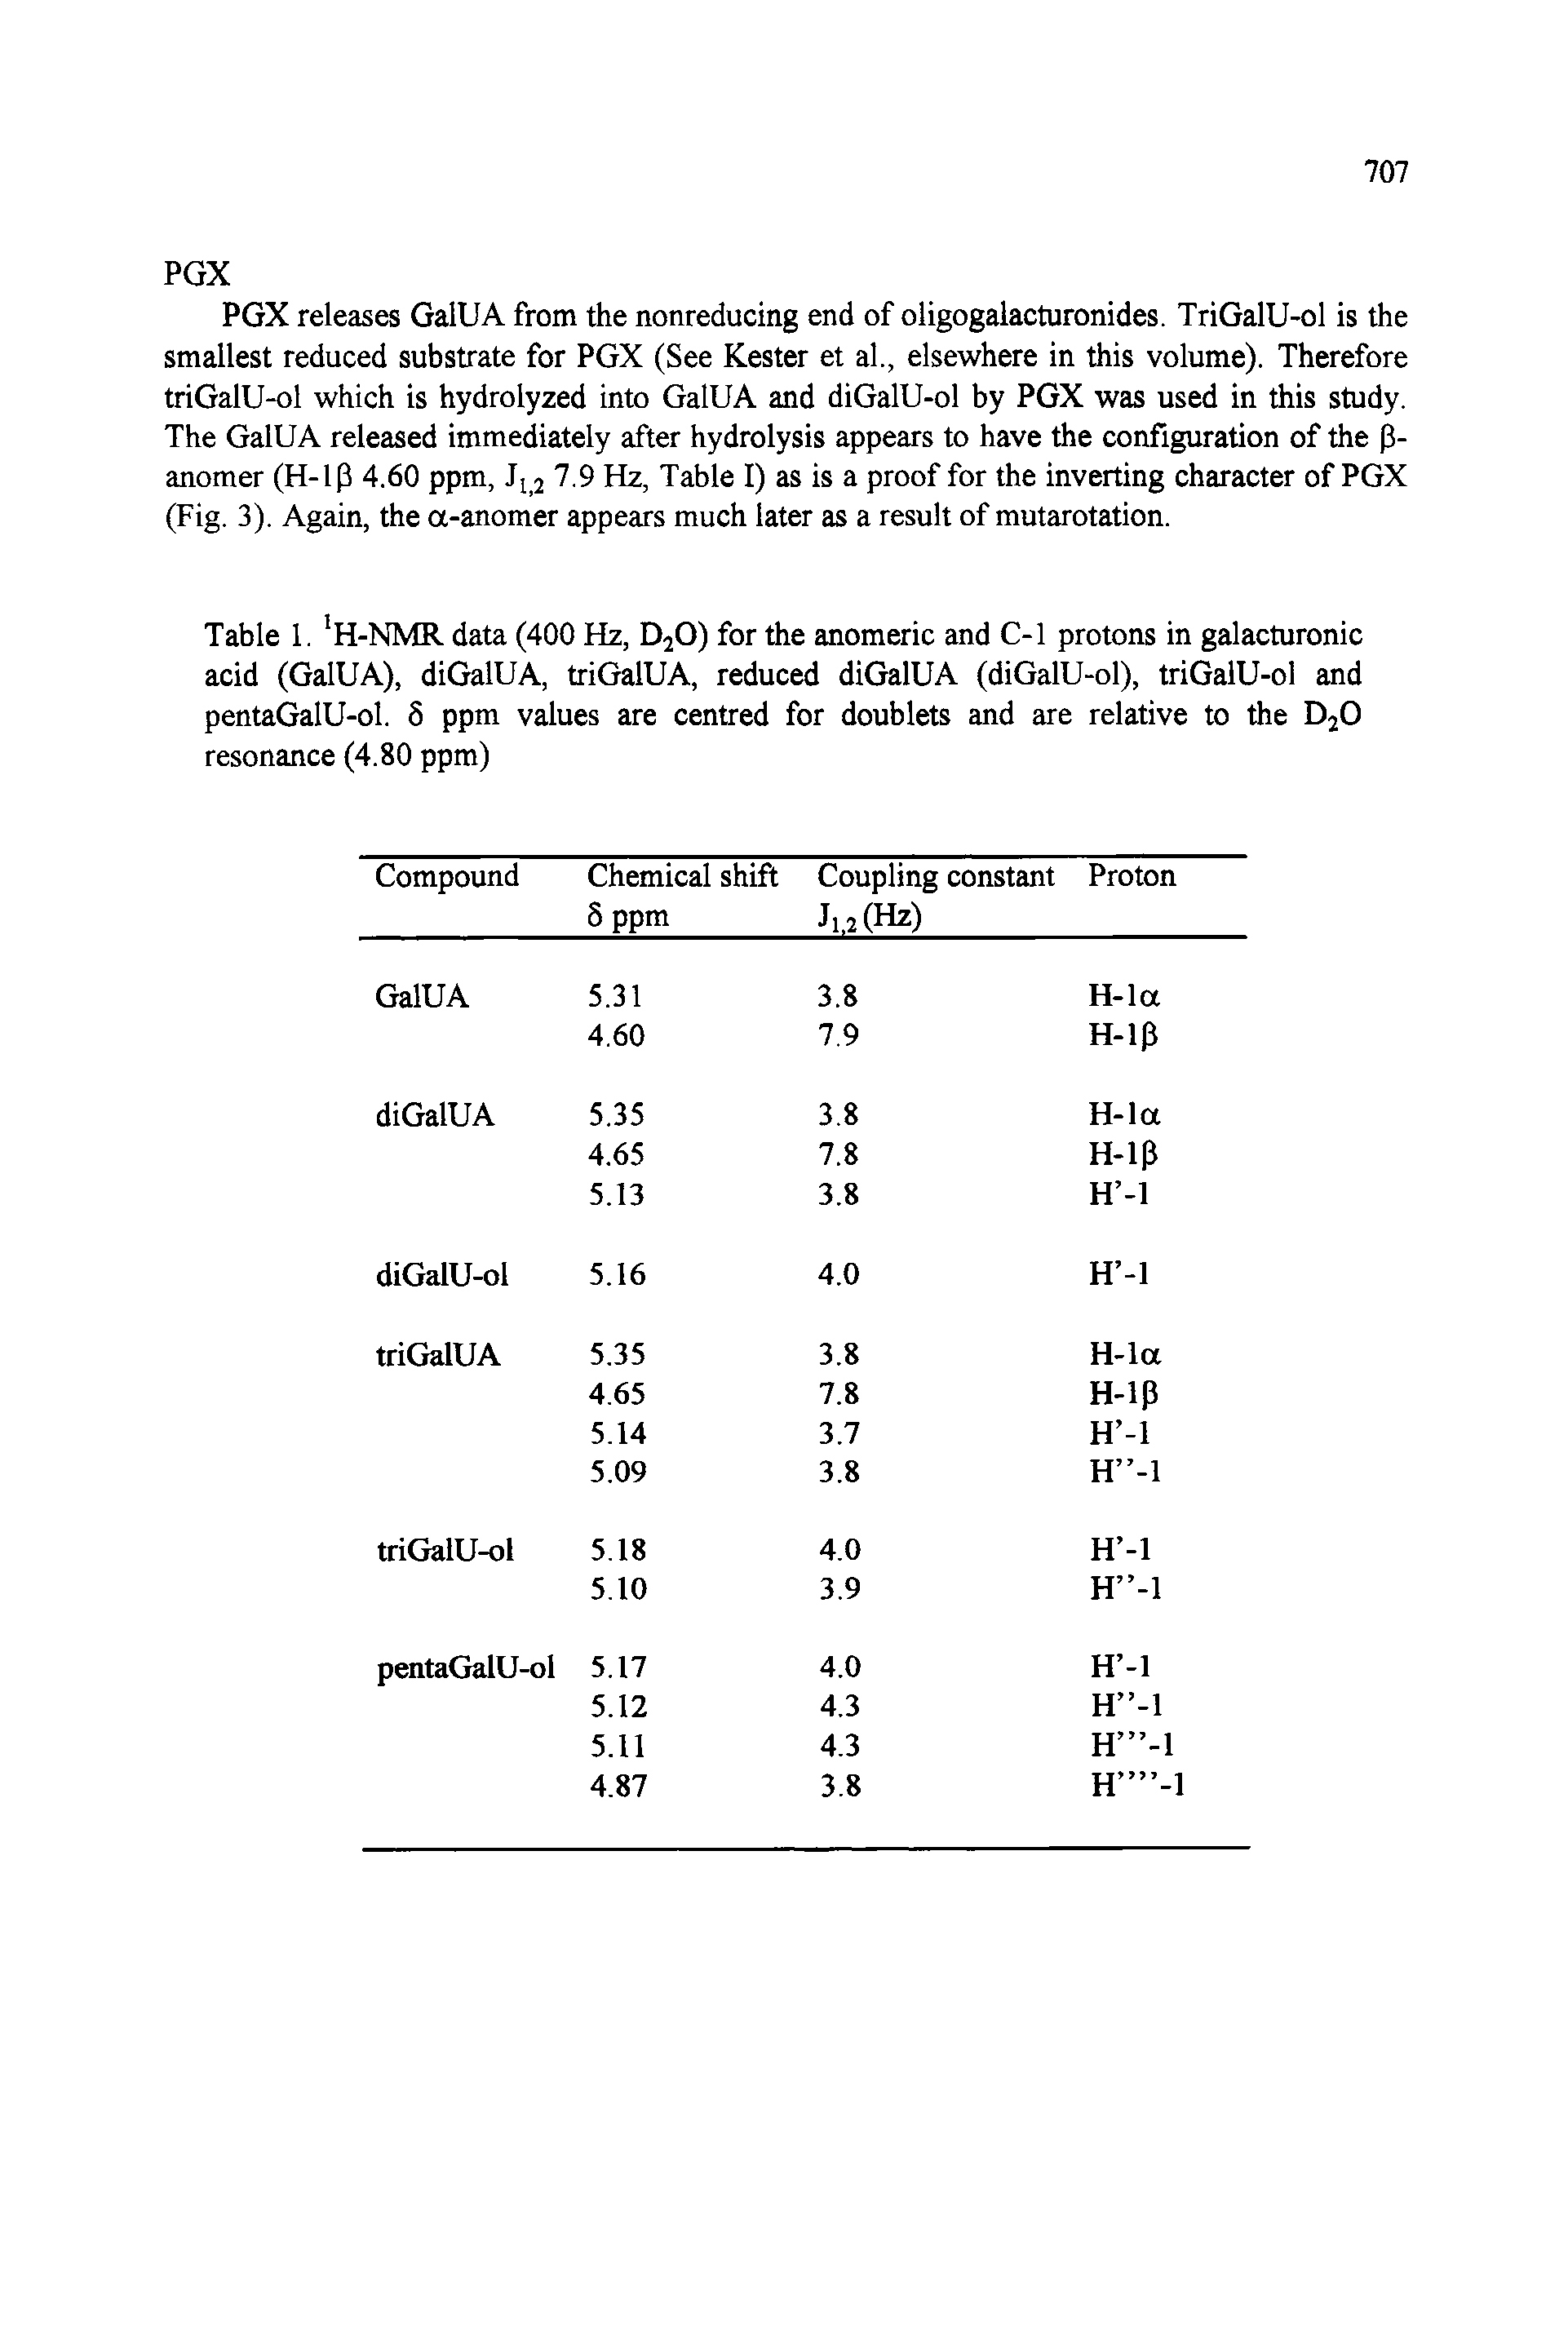 Table 1. H-NMR data (400 Hz, DjO) for the anomeric and C-1 protons in galacturonic acid (GalUA), diGalUA, triGalUA, reduced diGalUA (diGalU-ol), triGalU-ol and pentaGalU-ol. 5 ppm values are centred for doublets and are relative to the D O resonance (4.80 ppm)...